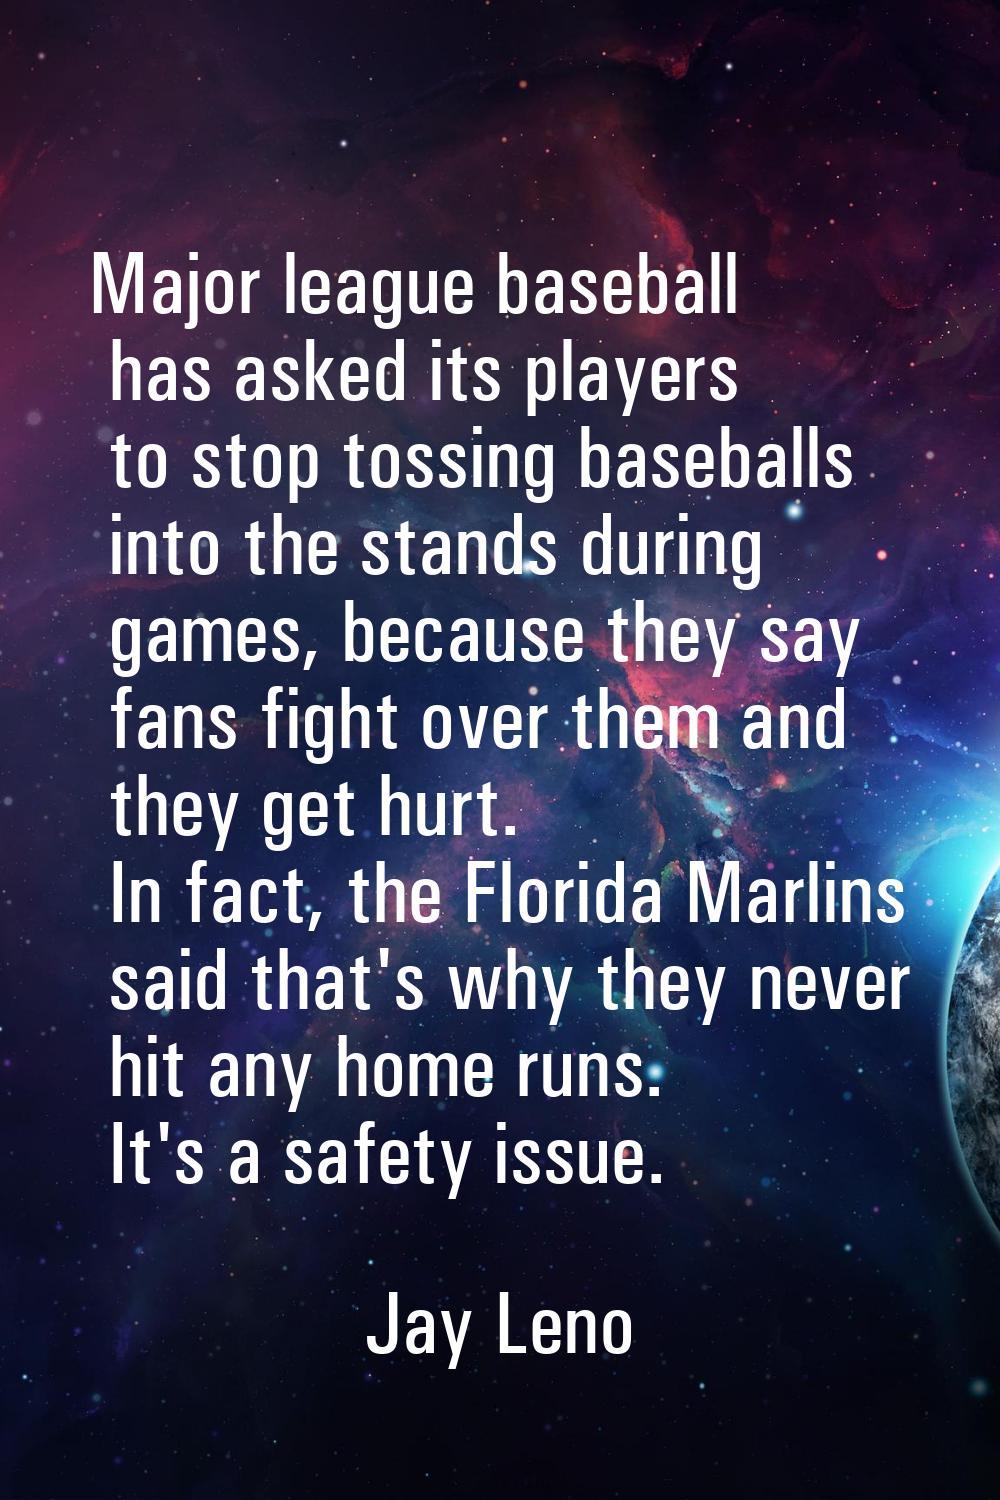 Major league baseball has asked its players to stop tossing baseballs into the stands during games,